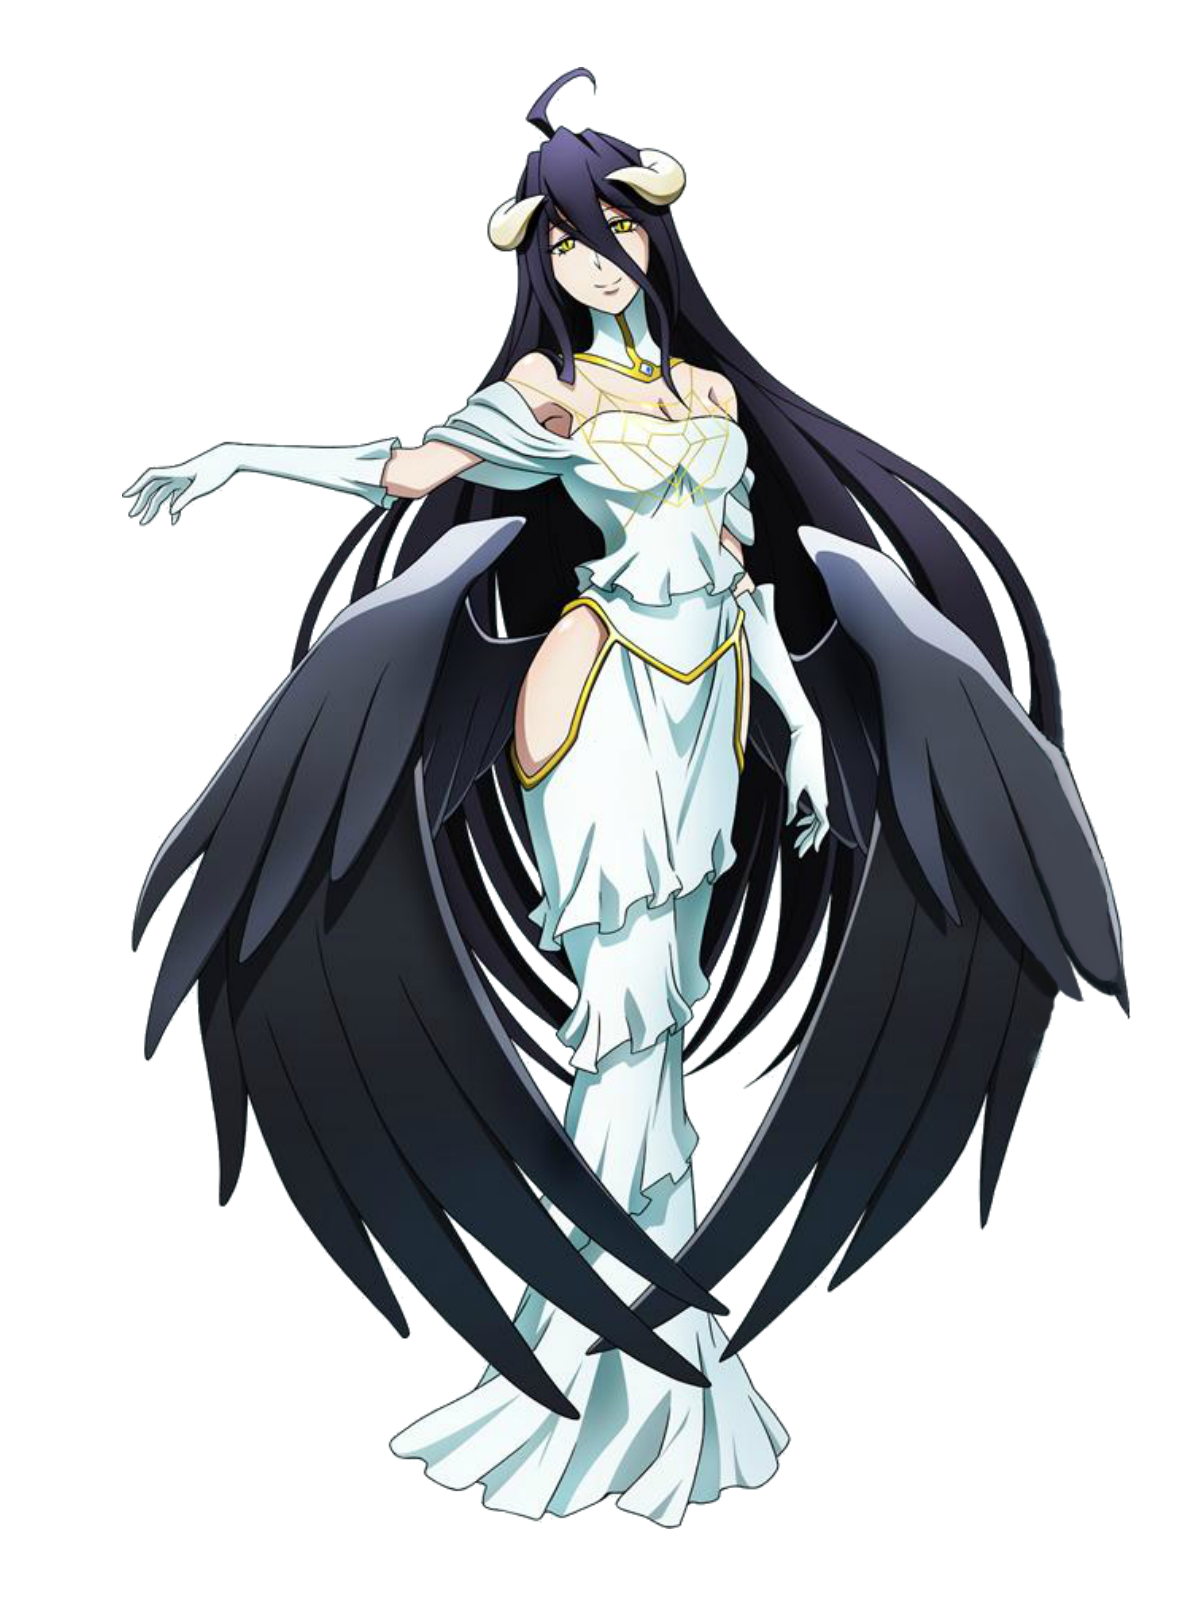 Overlord Albedo Action Figure 21.5 cm Japanese Anime Character Model PVC  Statue Ornaments for Desktop Decoration Collection Gift : Amazon.de: Toys